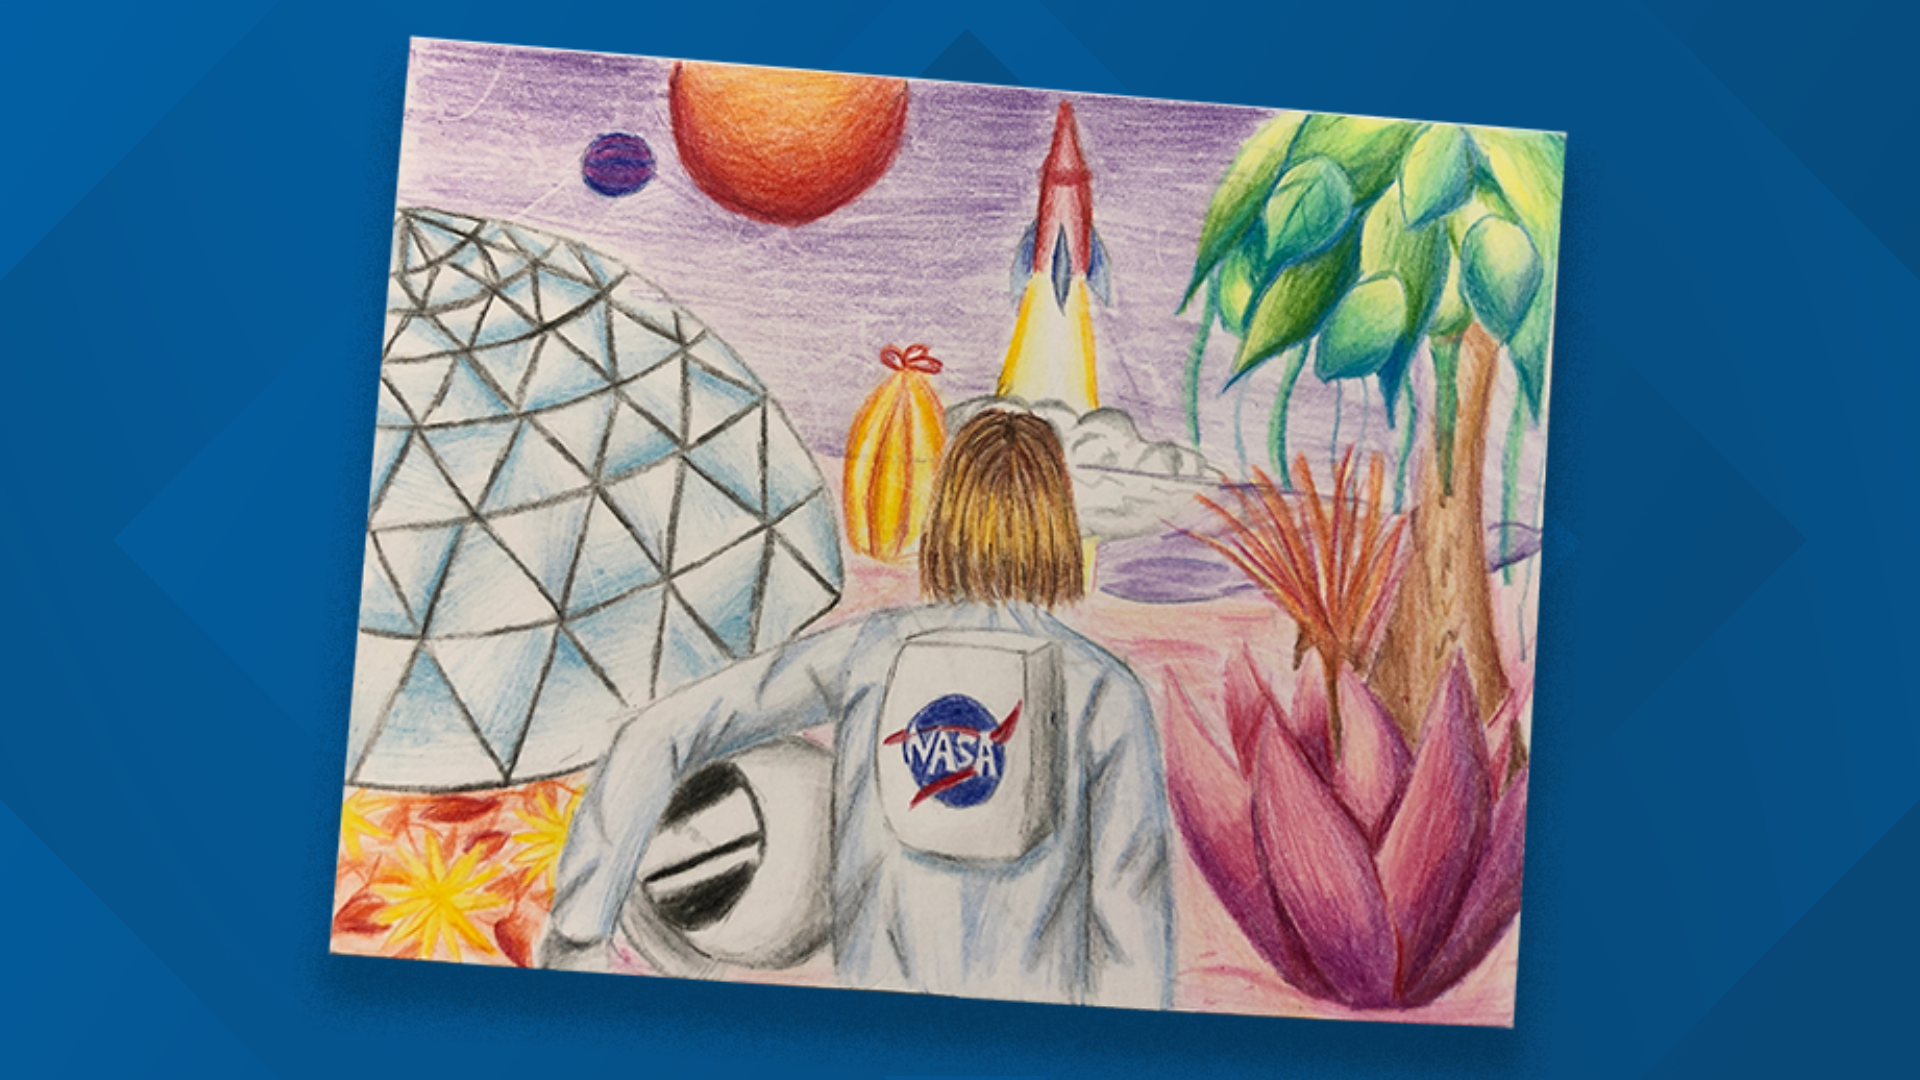 Blue Origin will launch postcards made by district students to space from their launch facility near Van Horn.